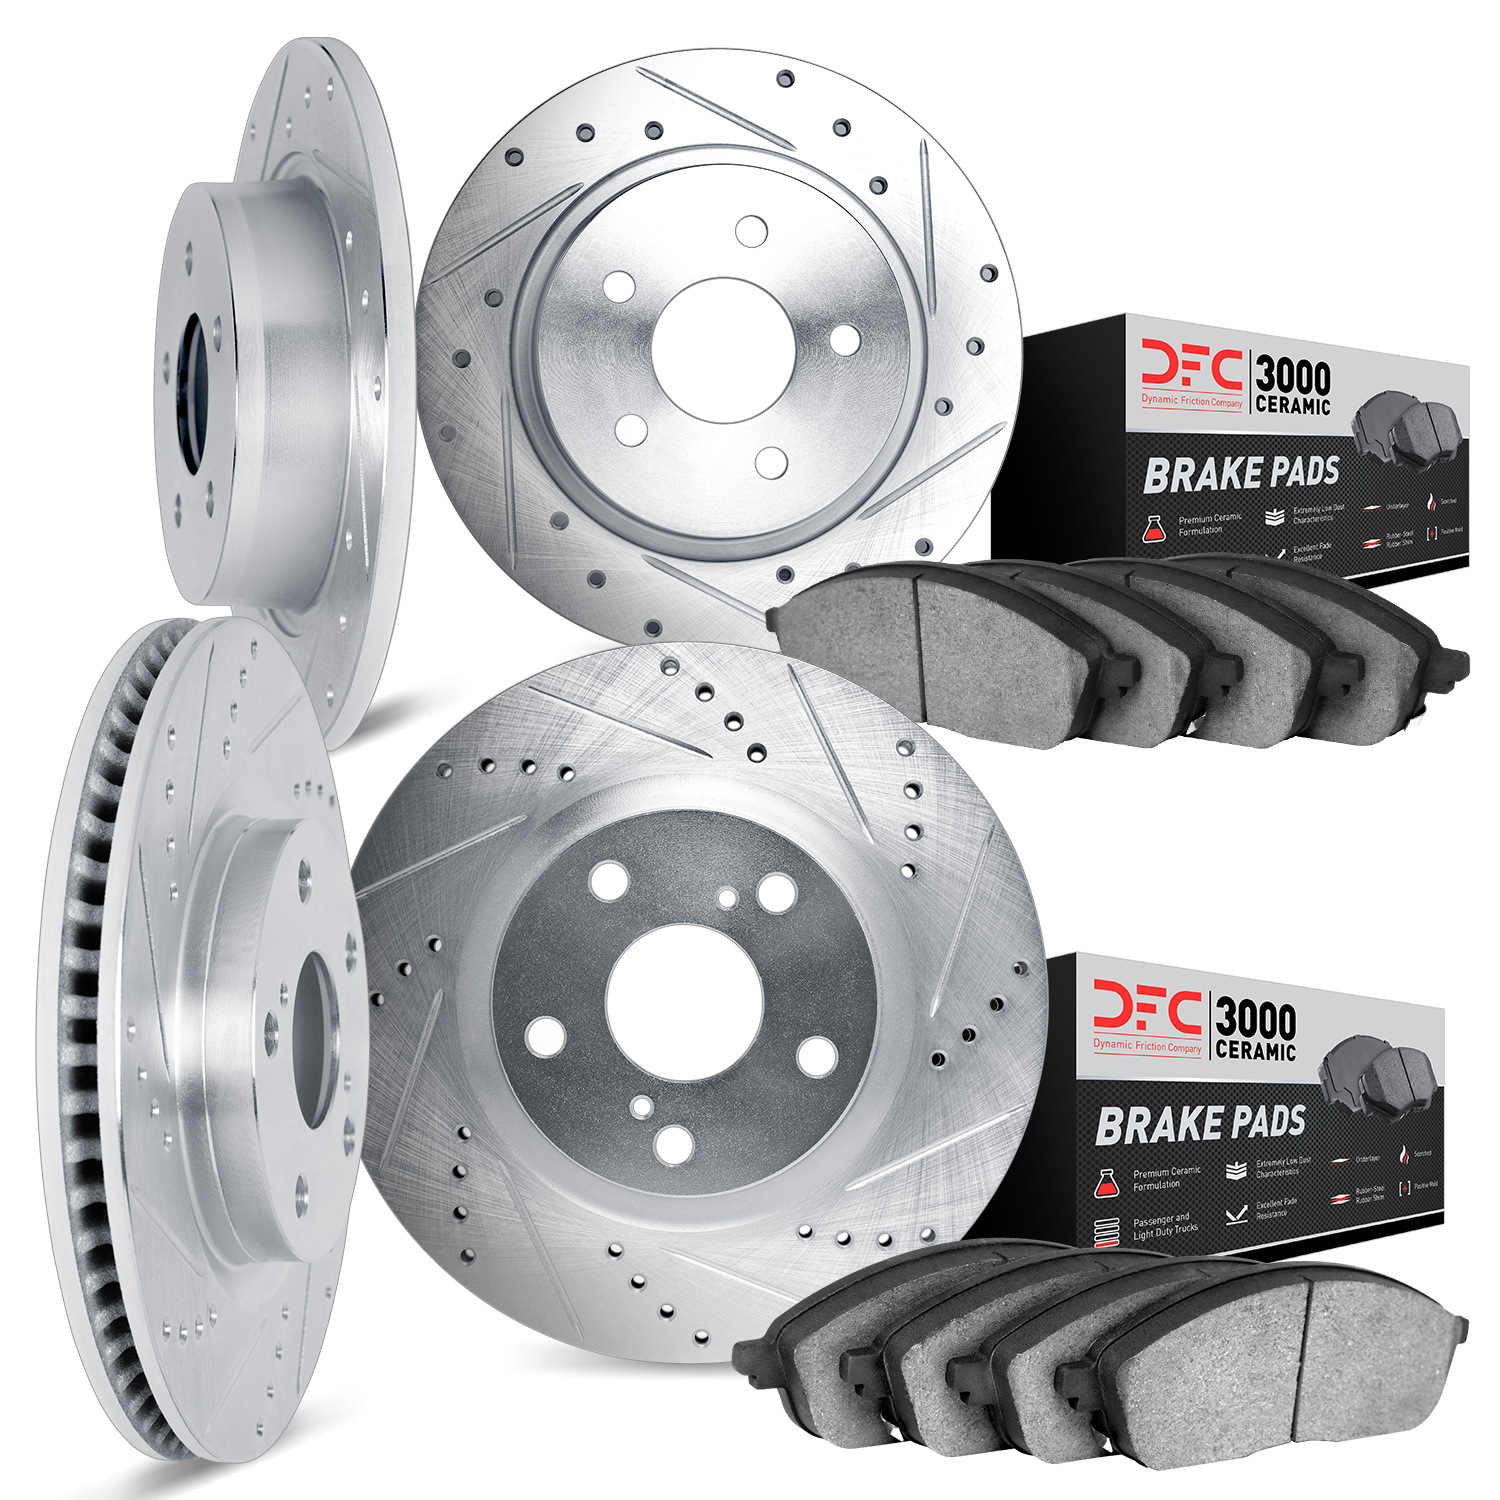 7304-55002 Drilled/Slotted Brake Rotor with 3000-Series Ceramic Brake Pads Kit [Silver], 2003-2005 Ford/Lincoln/Mercury/Mazda, P